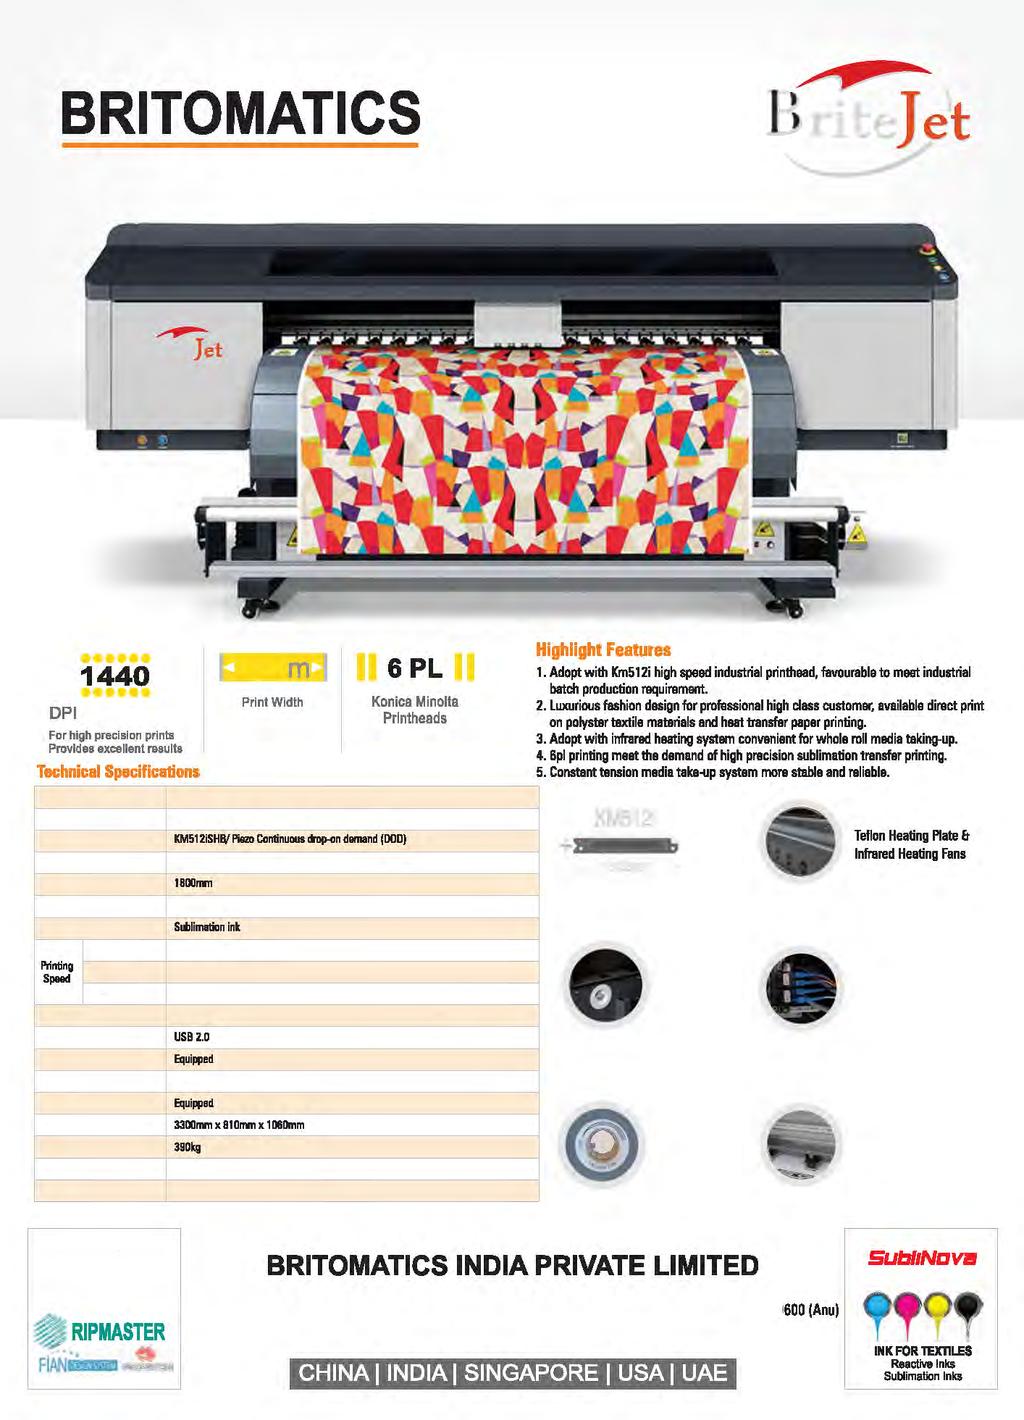 BRITOMATICS 1440 DPI print quality For high precision prints Provides excellent results Technical Spacifications - Modal Bj1804 Color Prinlh&11.